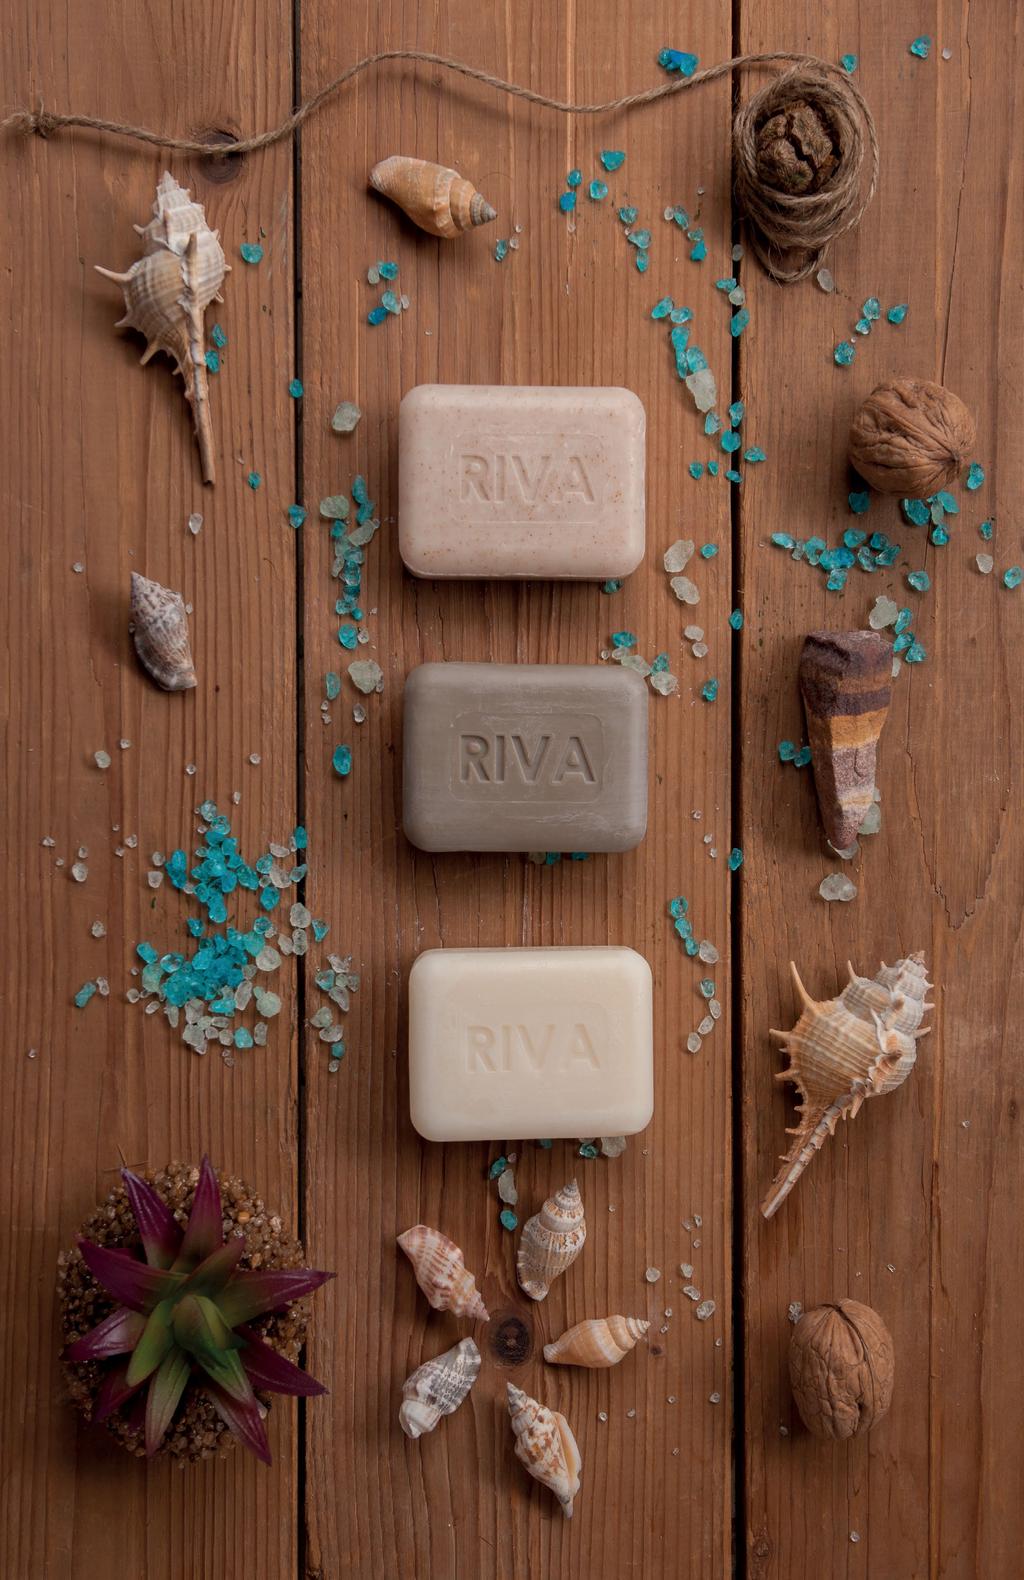 RivaCrystals Products RivaCrystals has various types of Dead Sea products, more than 25 items, that makes your skin feels younger, softer and healthier, RivaCrystals products include; facial care